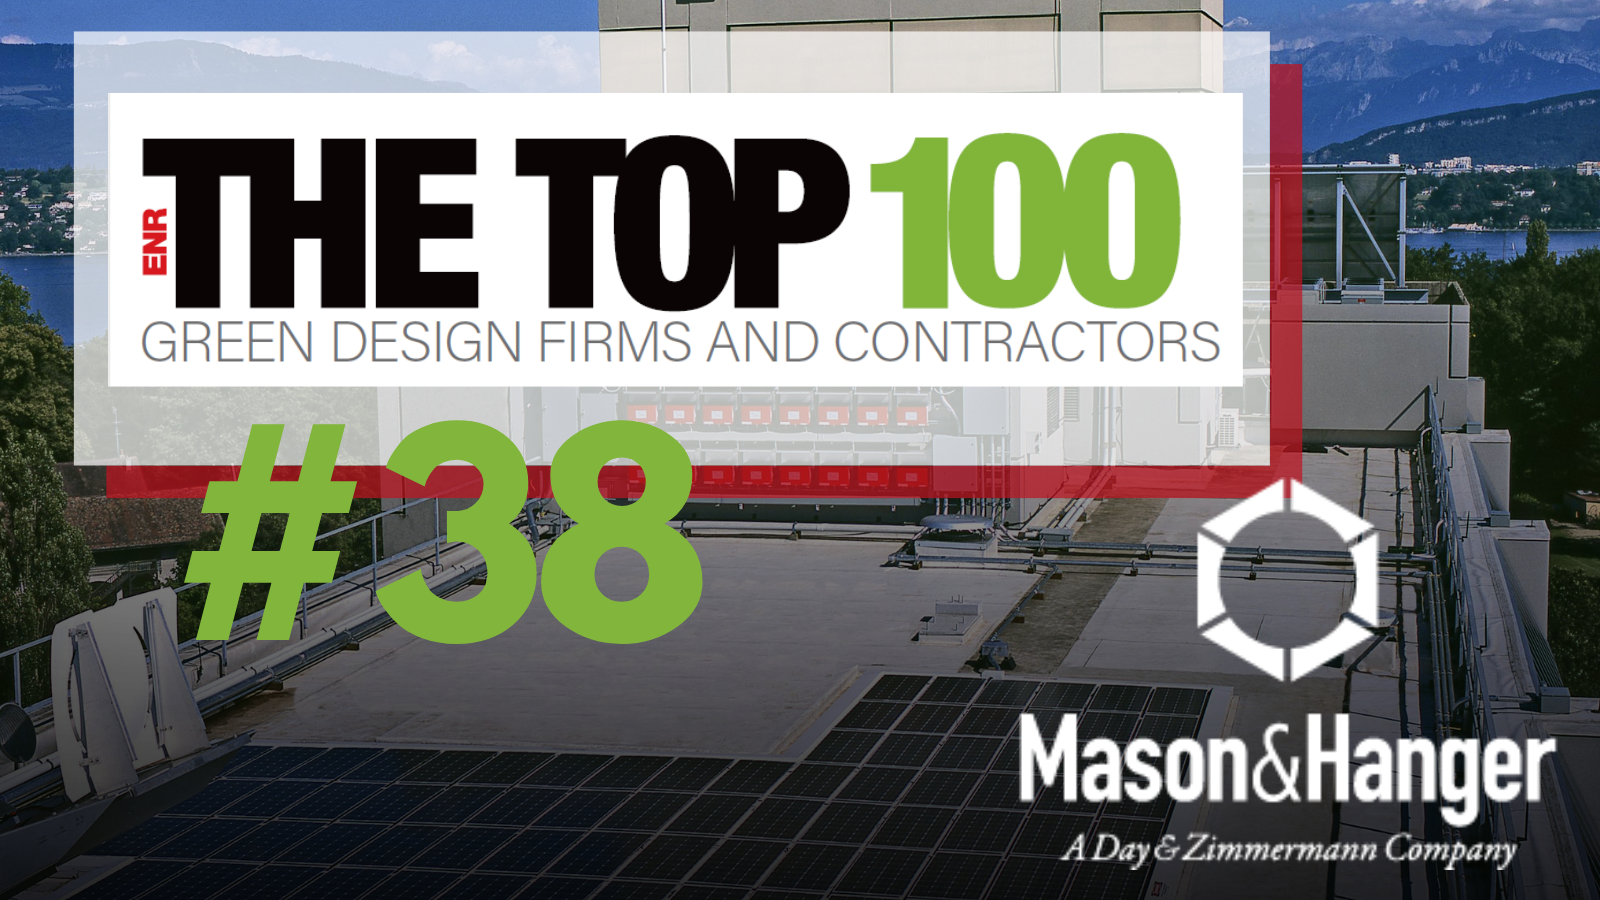 Mason & Hanger Ranked #38 by Engineering News-Record Among Top 100 Green Buildings Design Firms